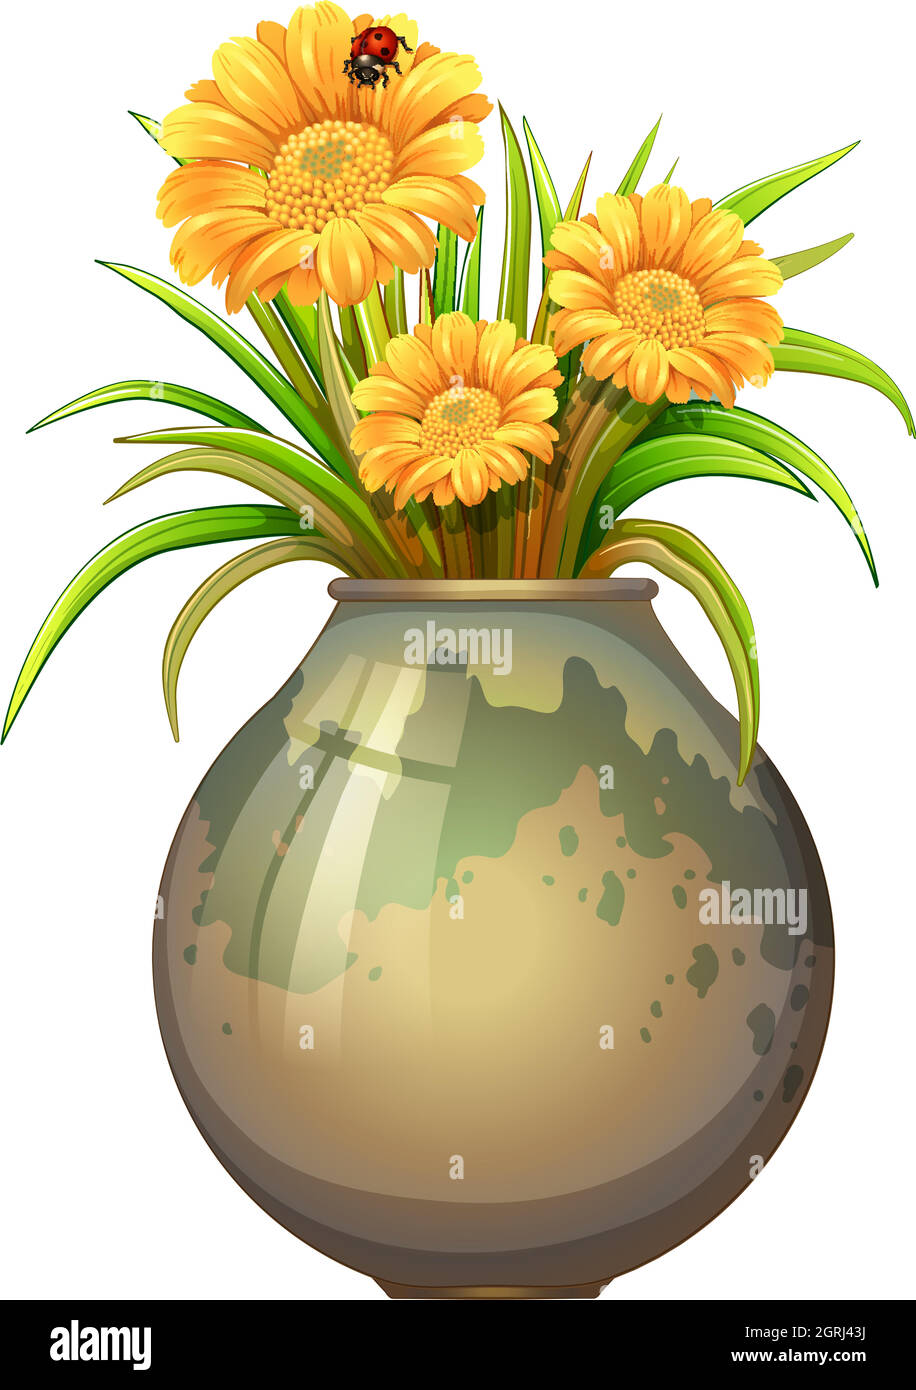 A plant in a pot with blooming flowers Stock Vector